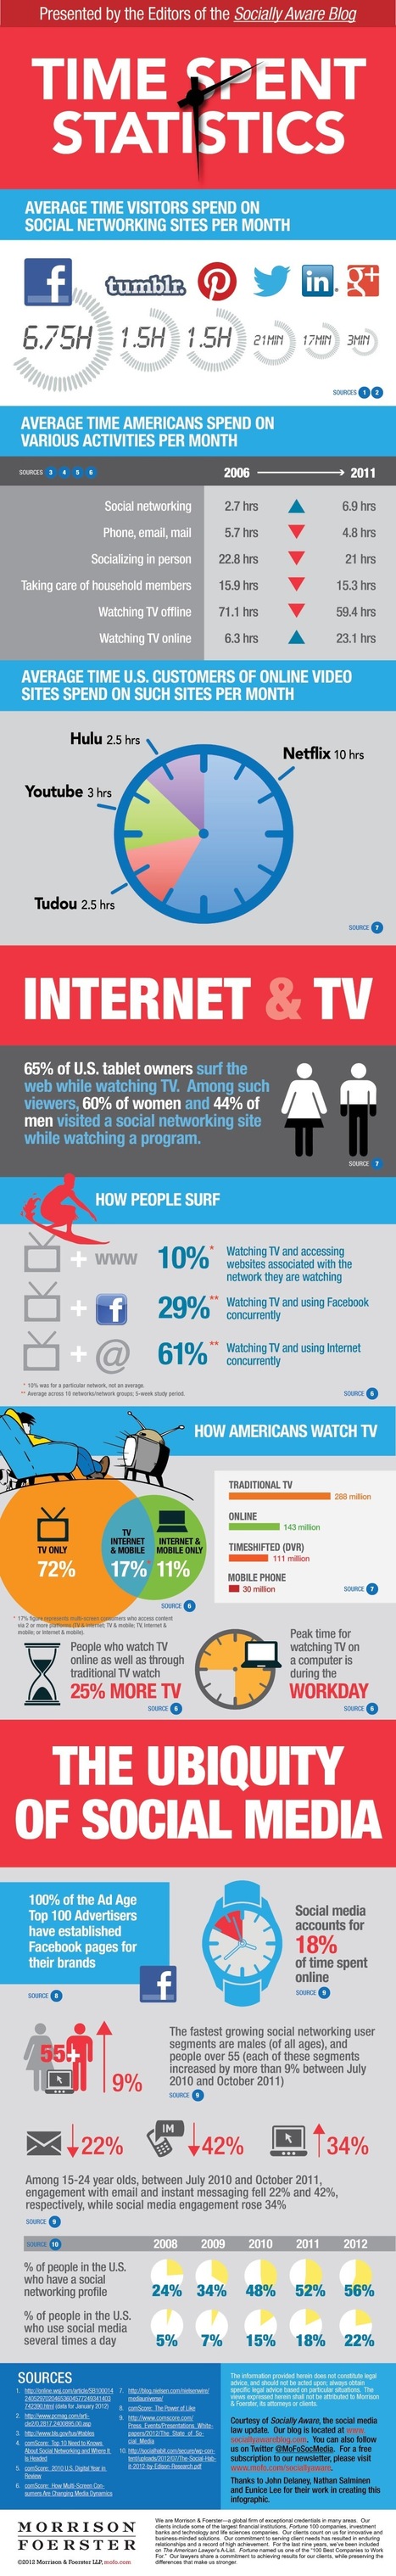 Users Average 7 Hours A Month On Facebook, Just 3 Minutes On Google+ [Infographic] | Education & Numérique | Scoop.it